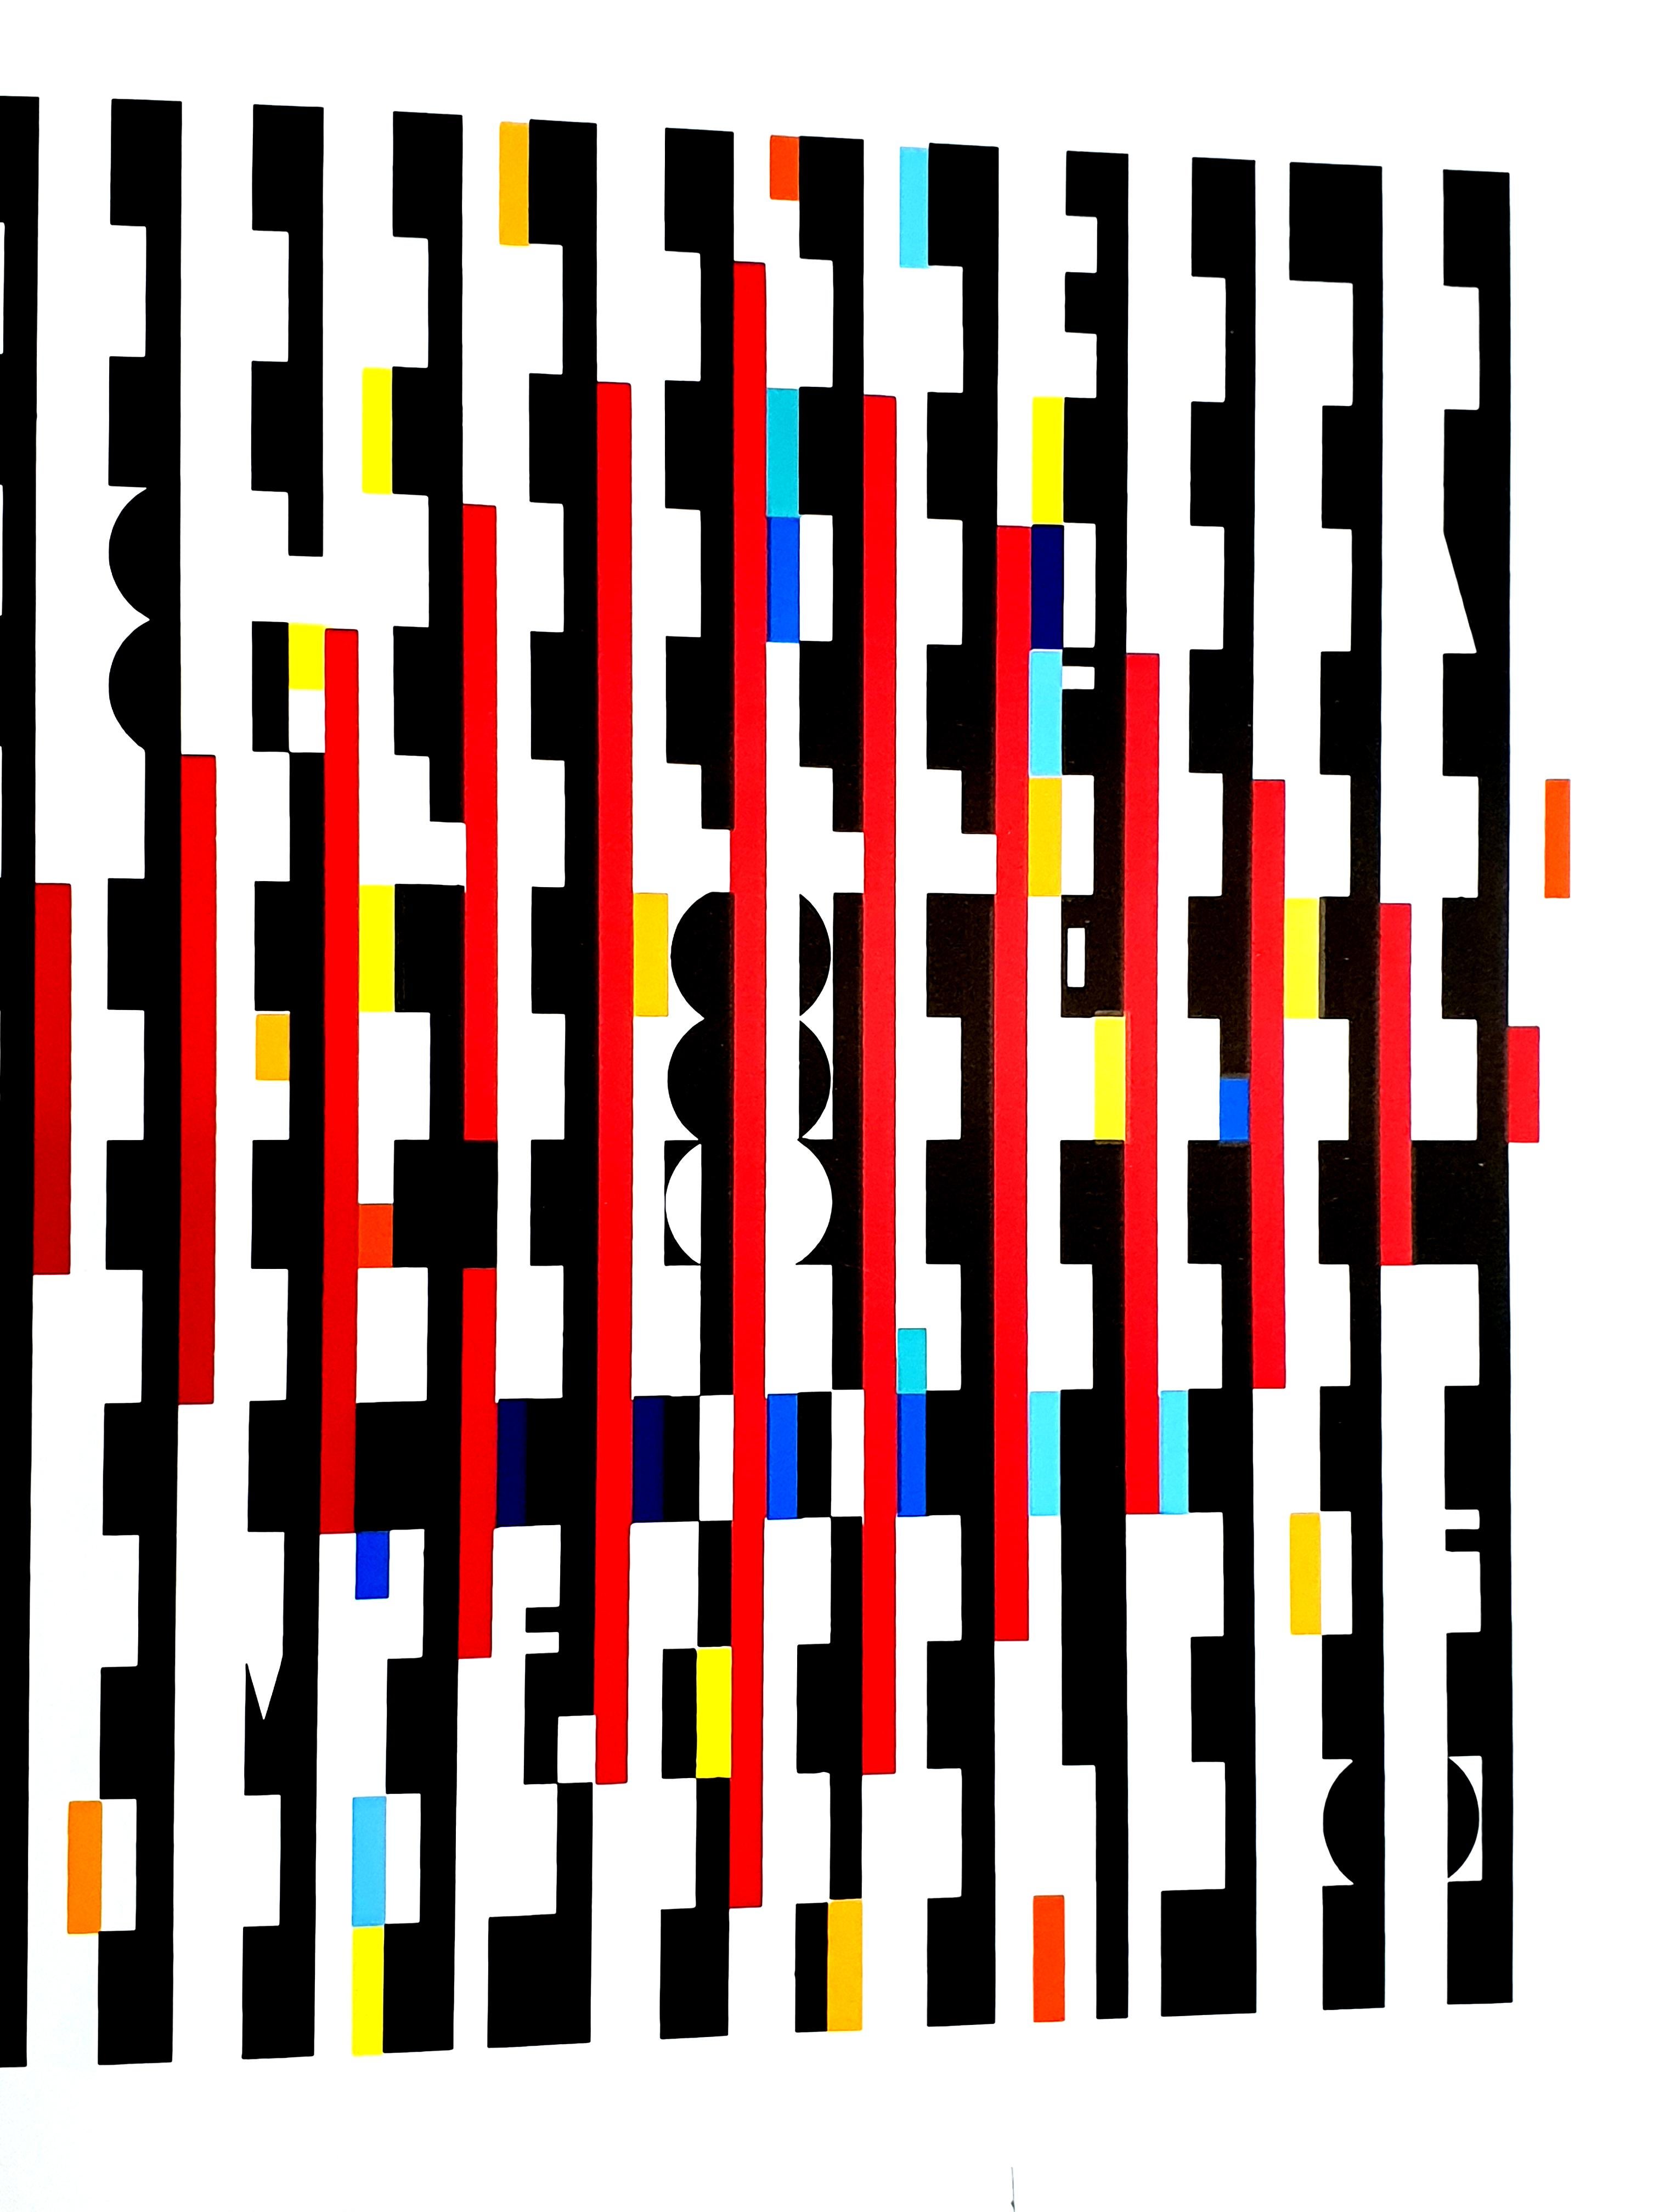 Yaacov Agam - Cinétique à l'as de Pique - Lithograph
1971
Dimensions: 32 x 70 cm 
Publisher: G. di San Lazzaro.
From the art revue XXe sècle
Unsigned and unnumbered as issued